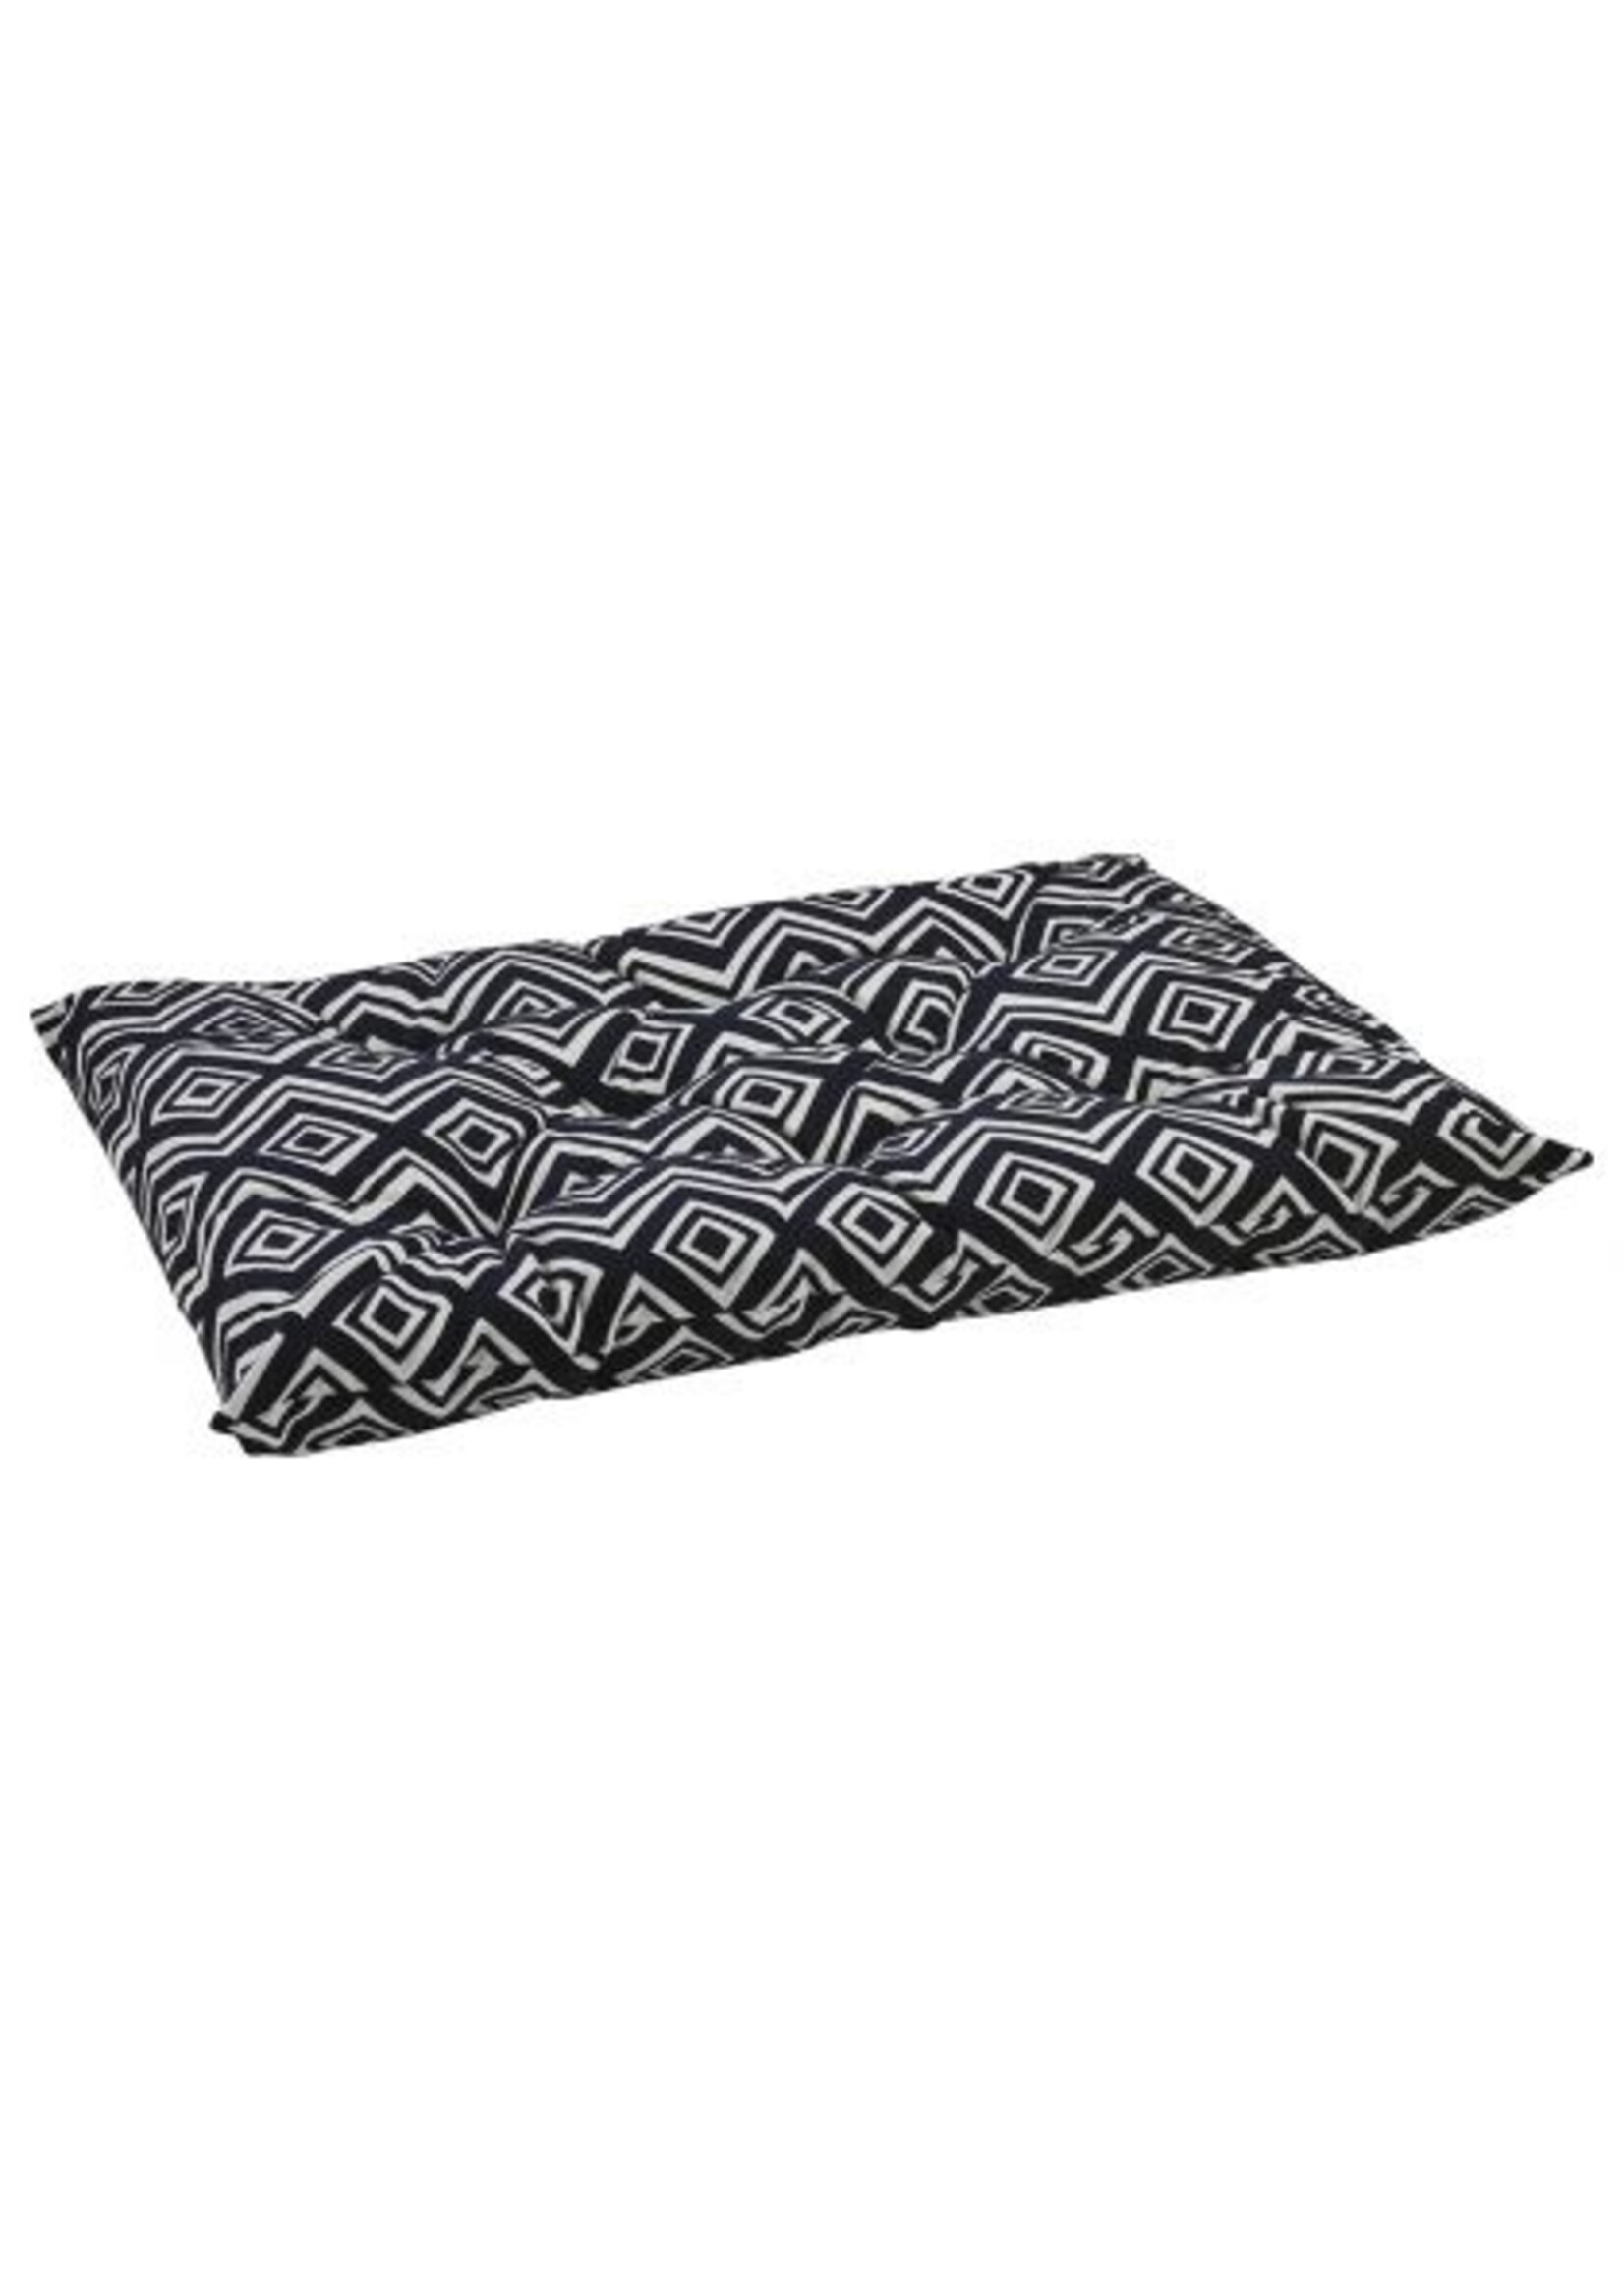 Bowsers Pet Products Bowsers Pet Tufted Cushion Microvelvet